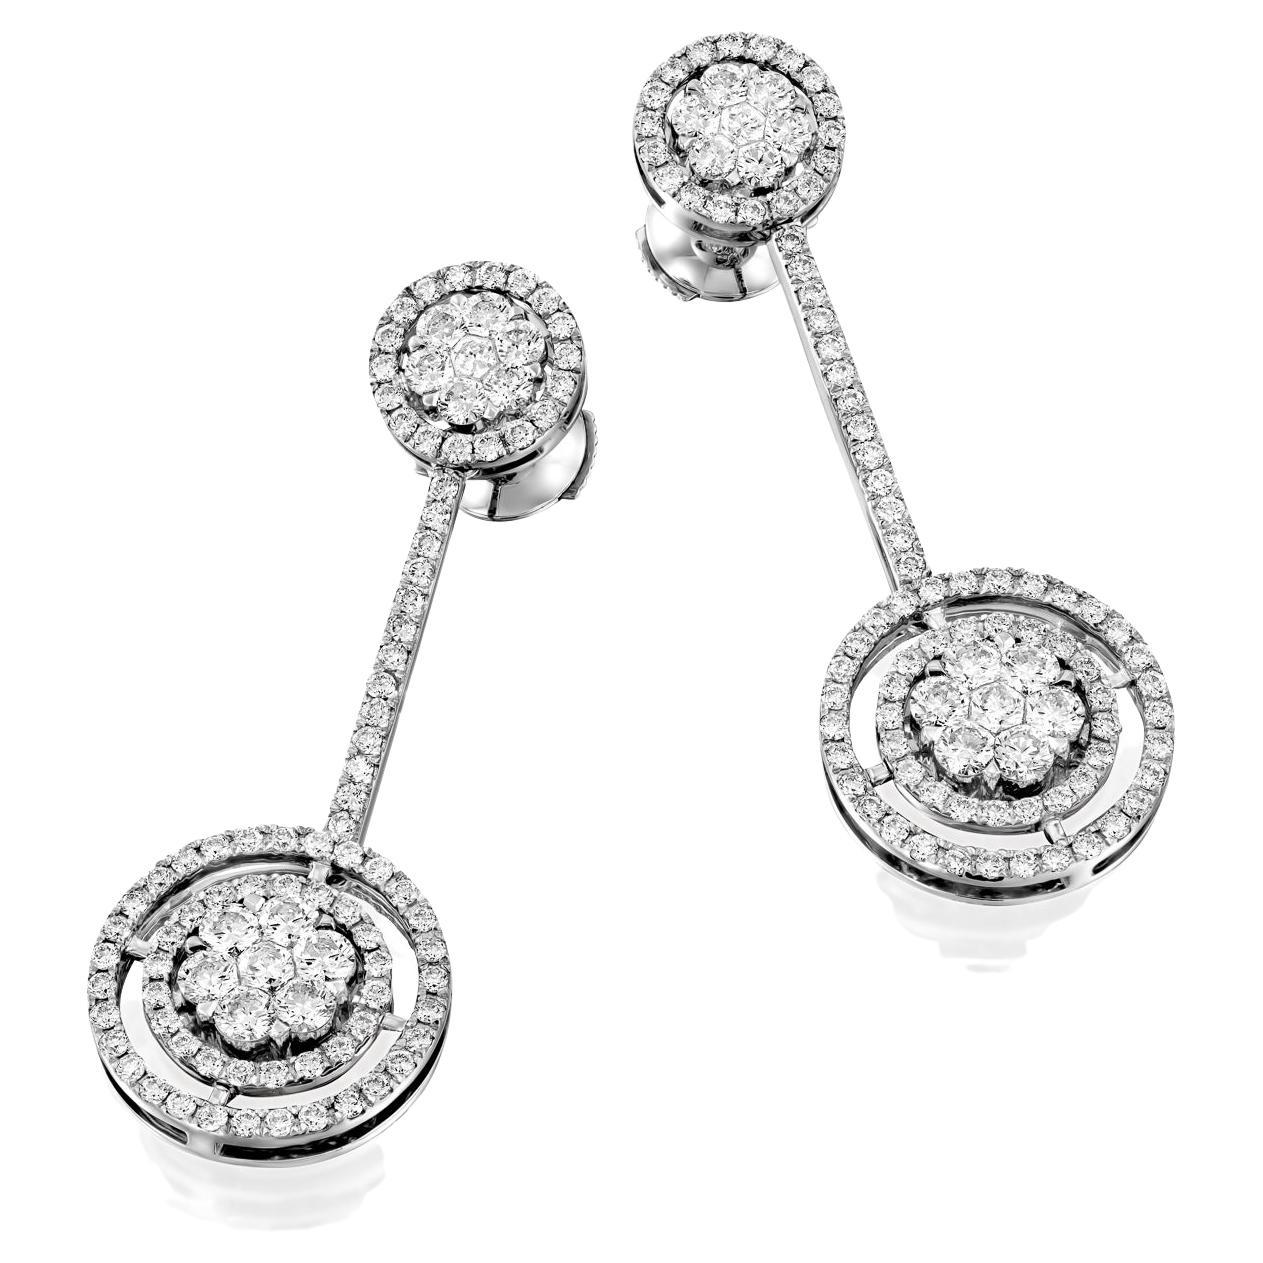 Elevate your style to new heights with the Geraldo 2.95 Carat Diamond White Gold Invisible Setting Earrings, a true masterpiece of jewelry design. These stunning earrings feature 2.95 carats of round diamonds, all set in a combination of invisible